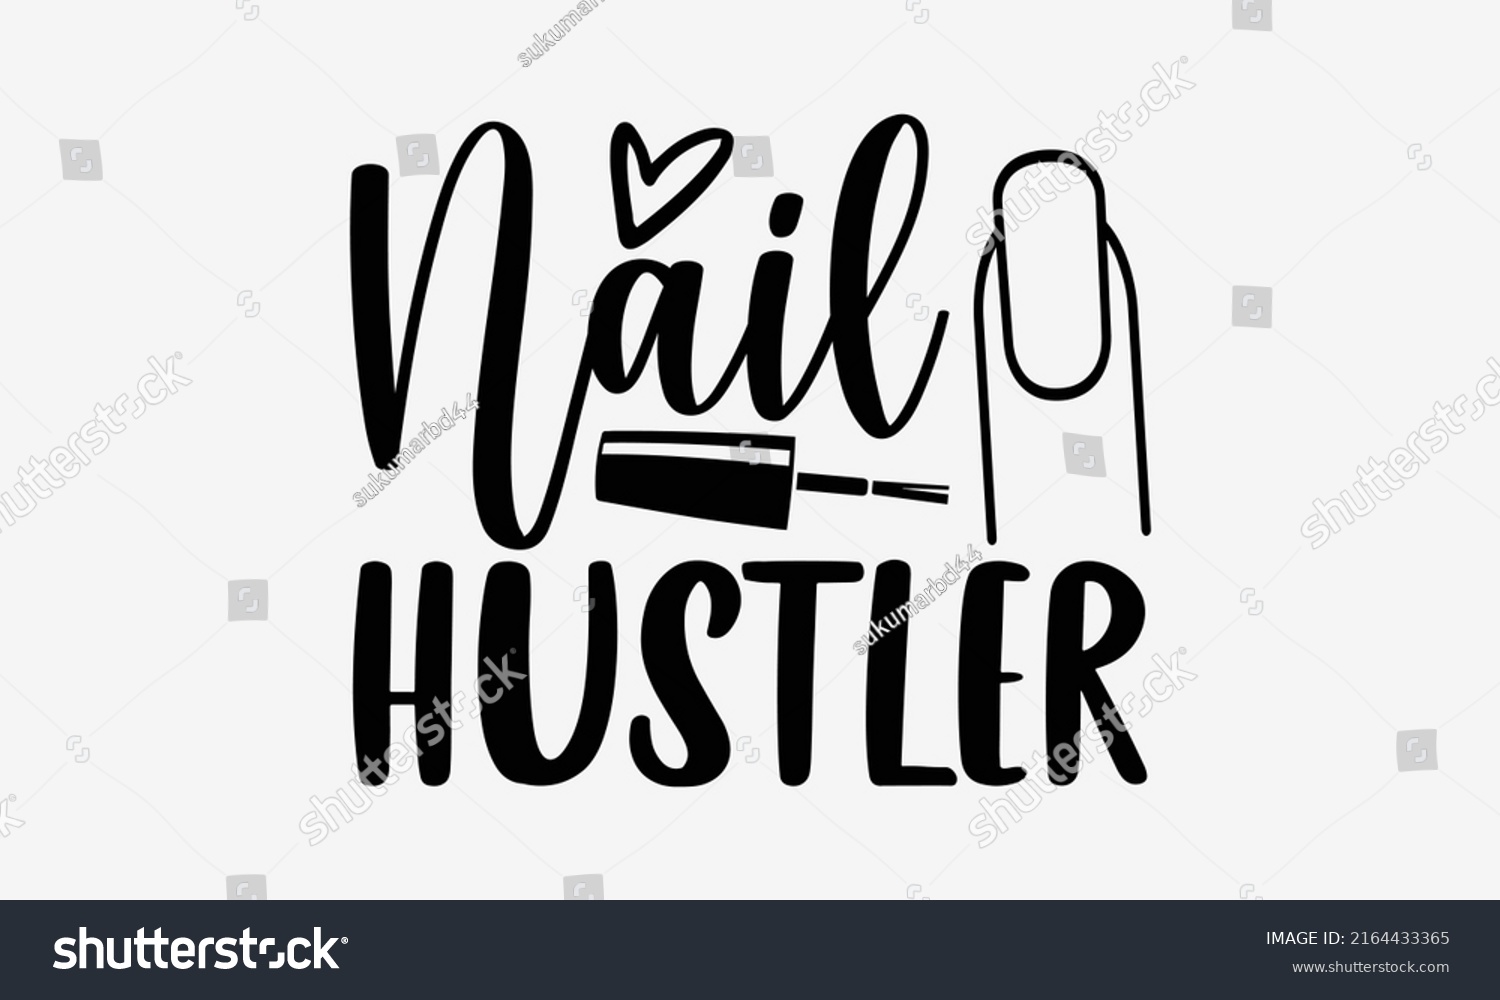 SVG of Nail hustler - Nail Tech  t shirt design, Hand drawn lettering phrase, Calligraphy graphic design, SVG Files for Cutting Cricut and Silhouette svg